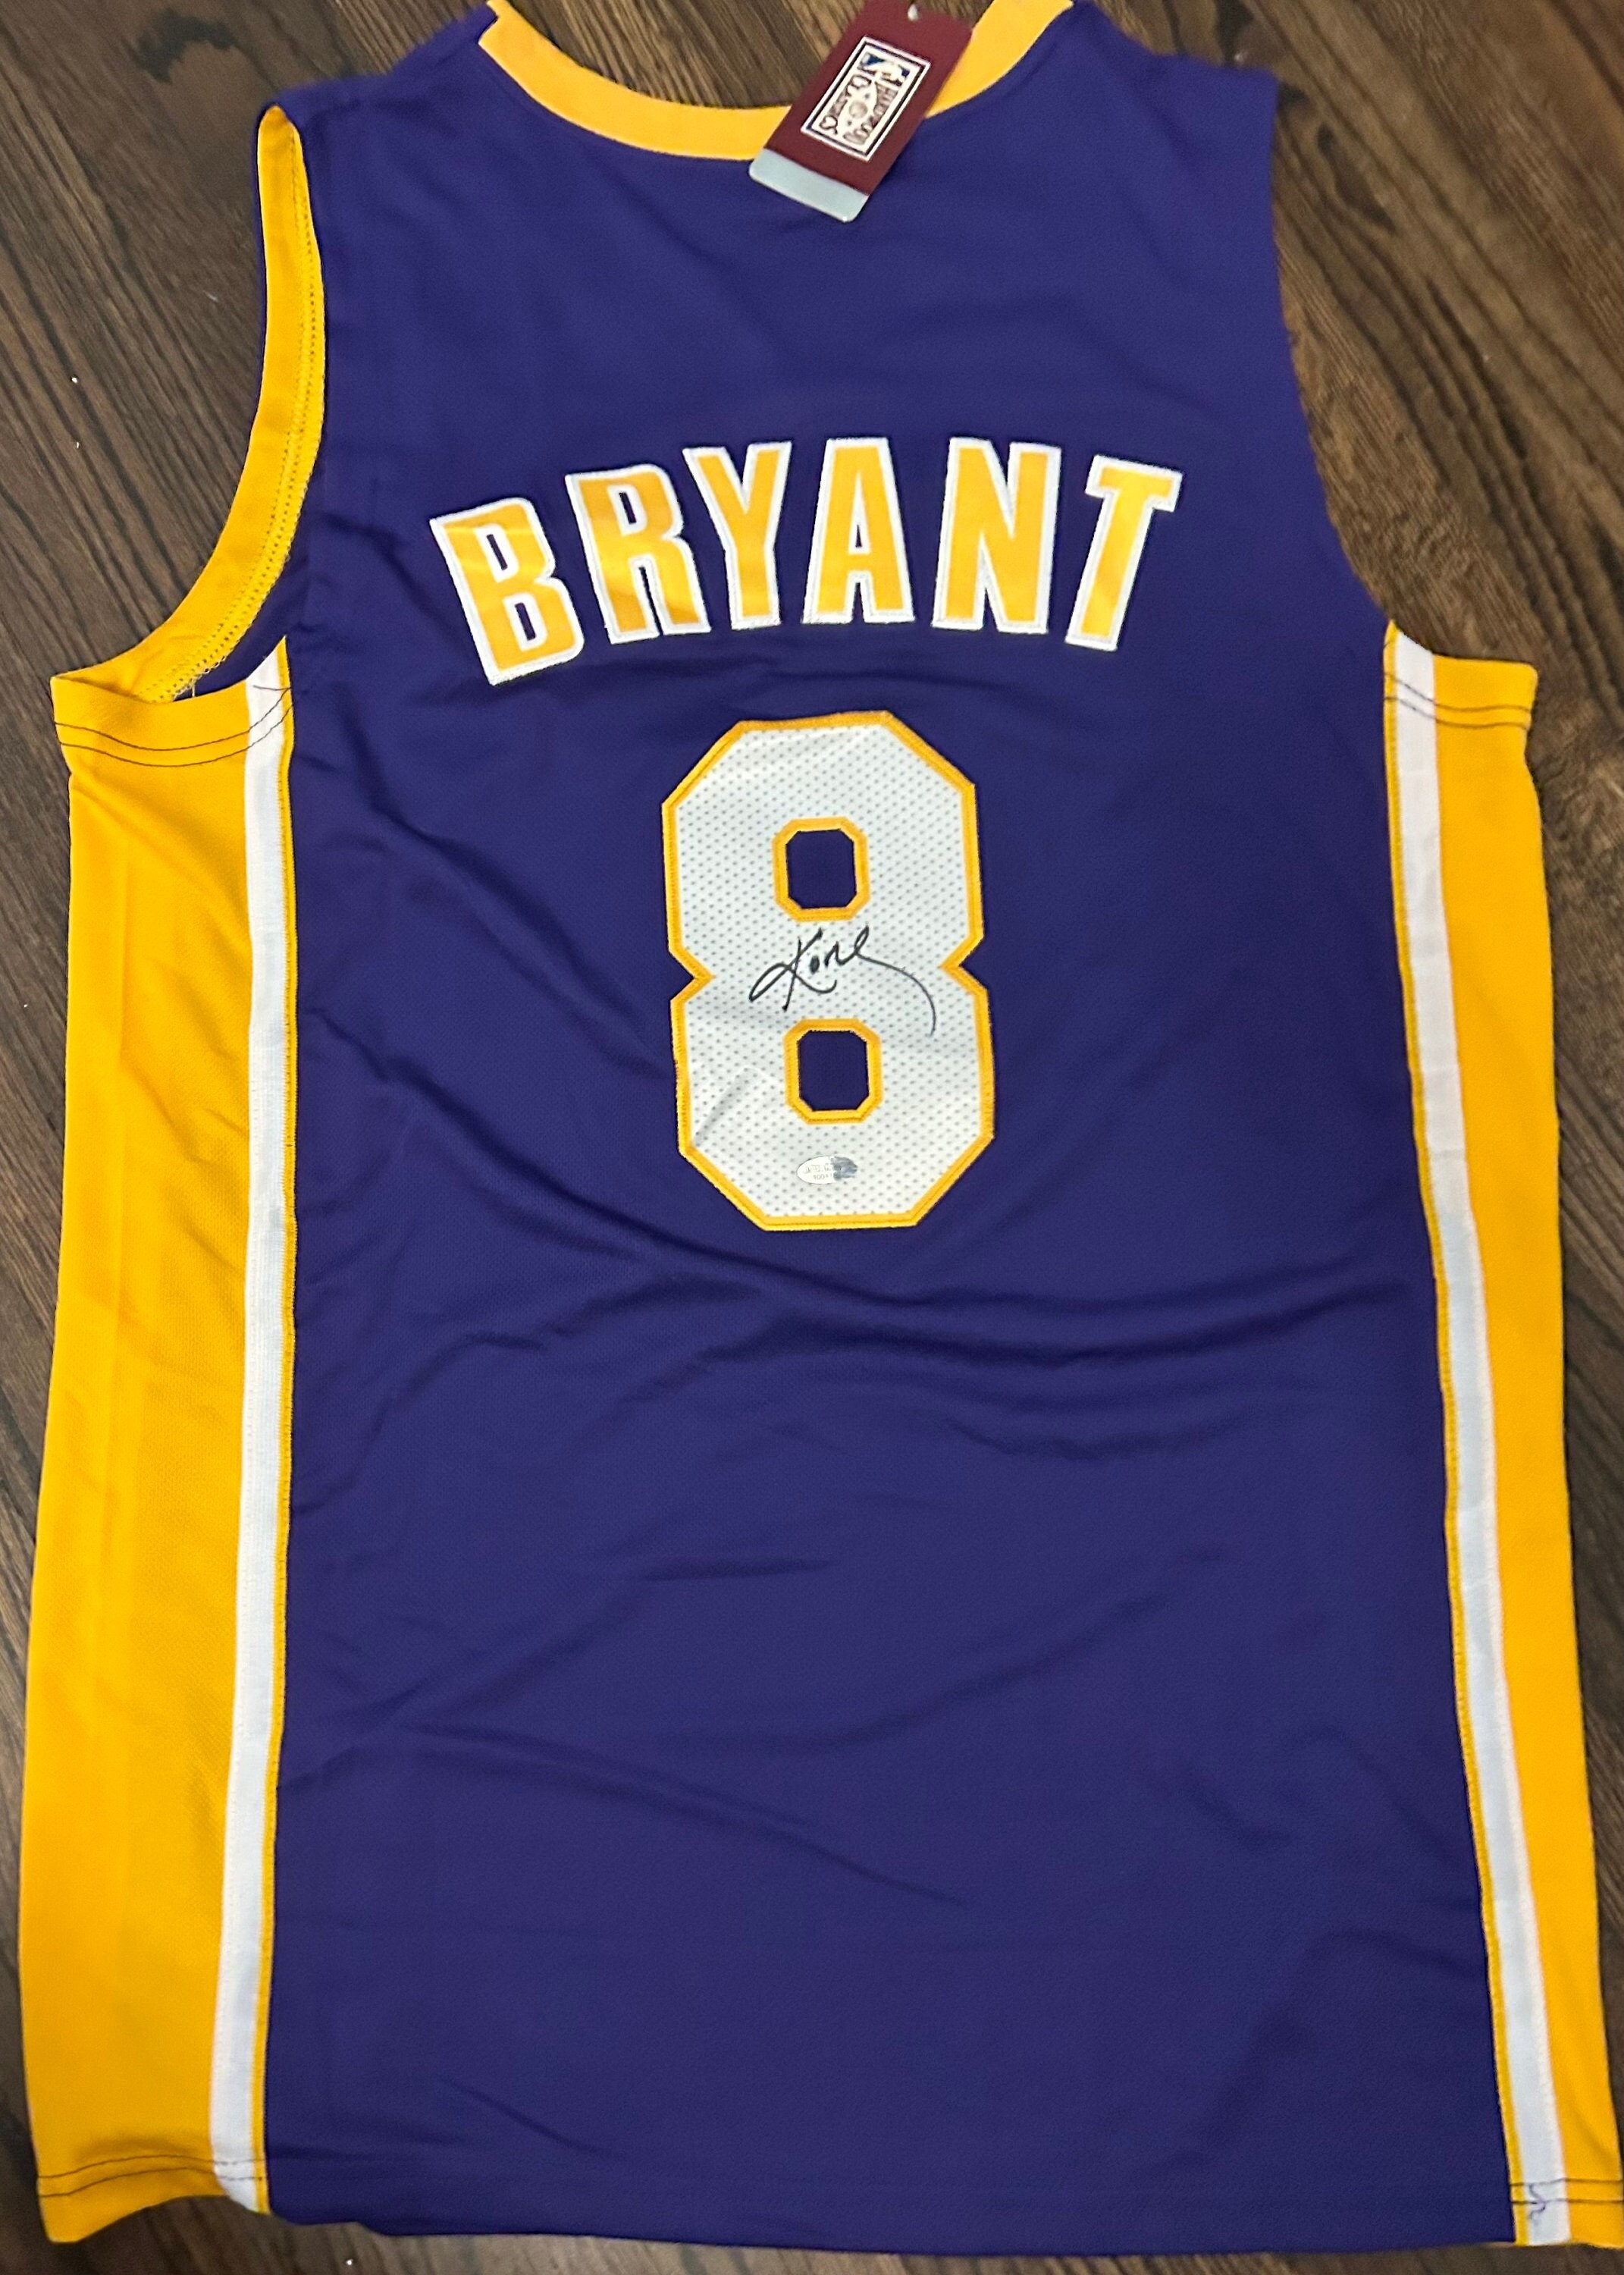 Kobe Bryant Signed Authentic 2009 Finals #24 Los Angeles Lakers Jersey UDA  & JSA